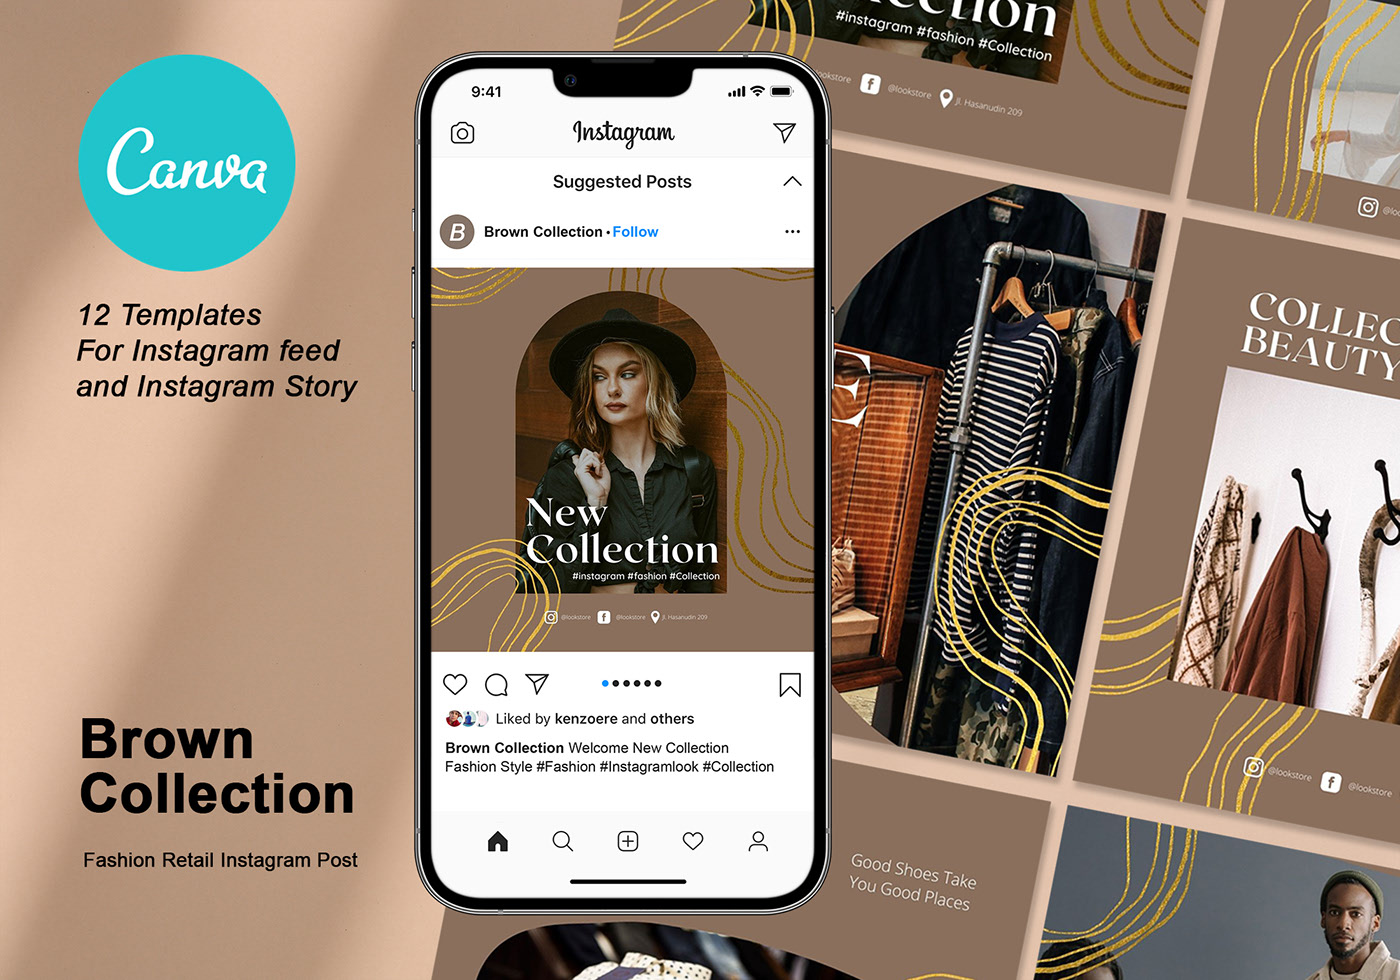 Brown Collection Fashion and Retail Instagram Templates on Behance